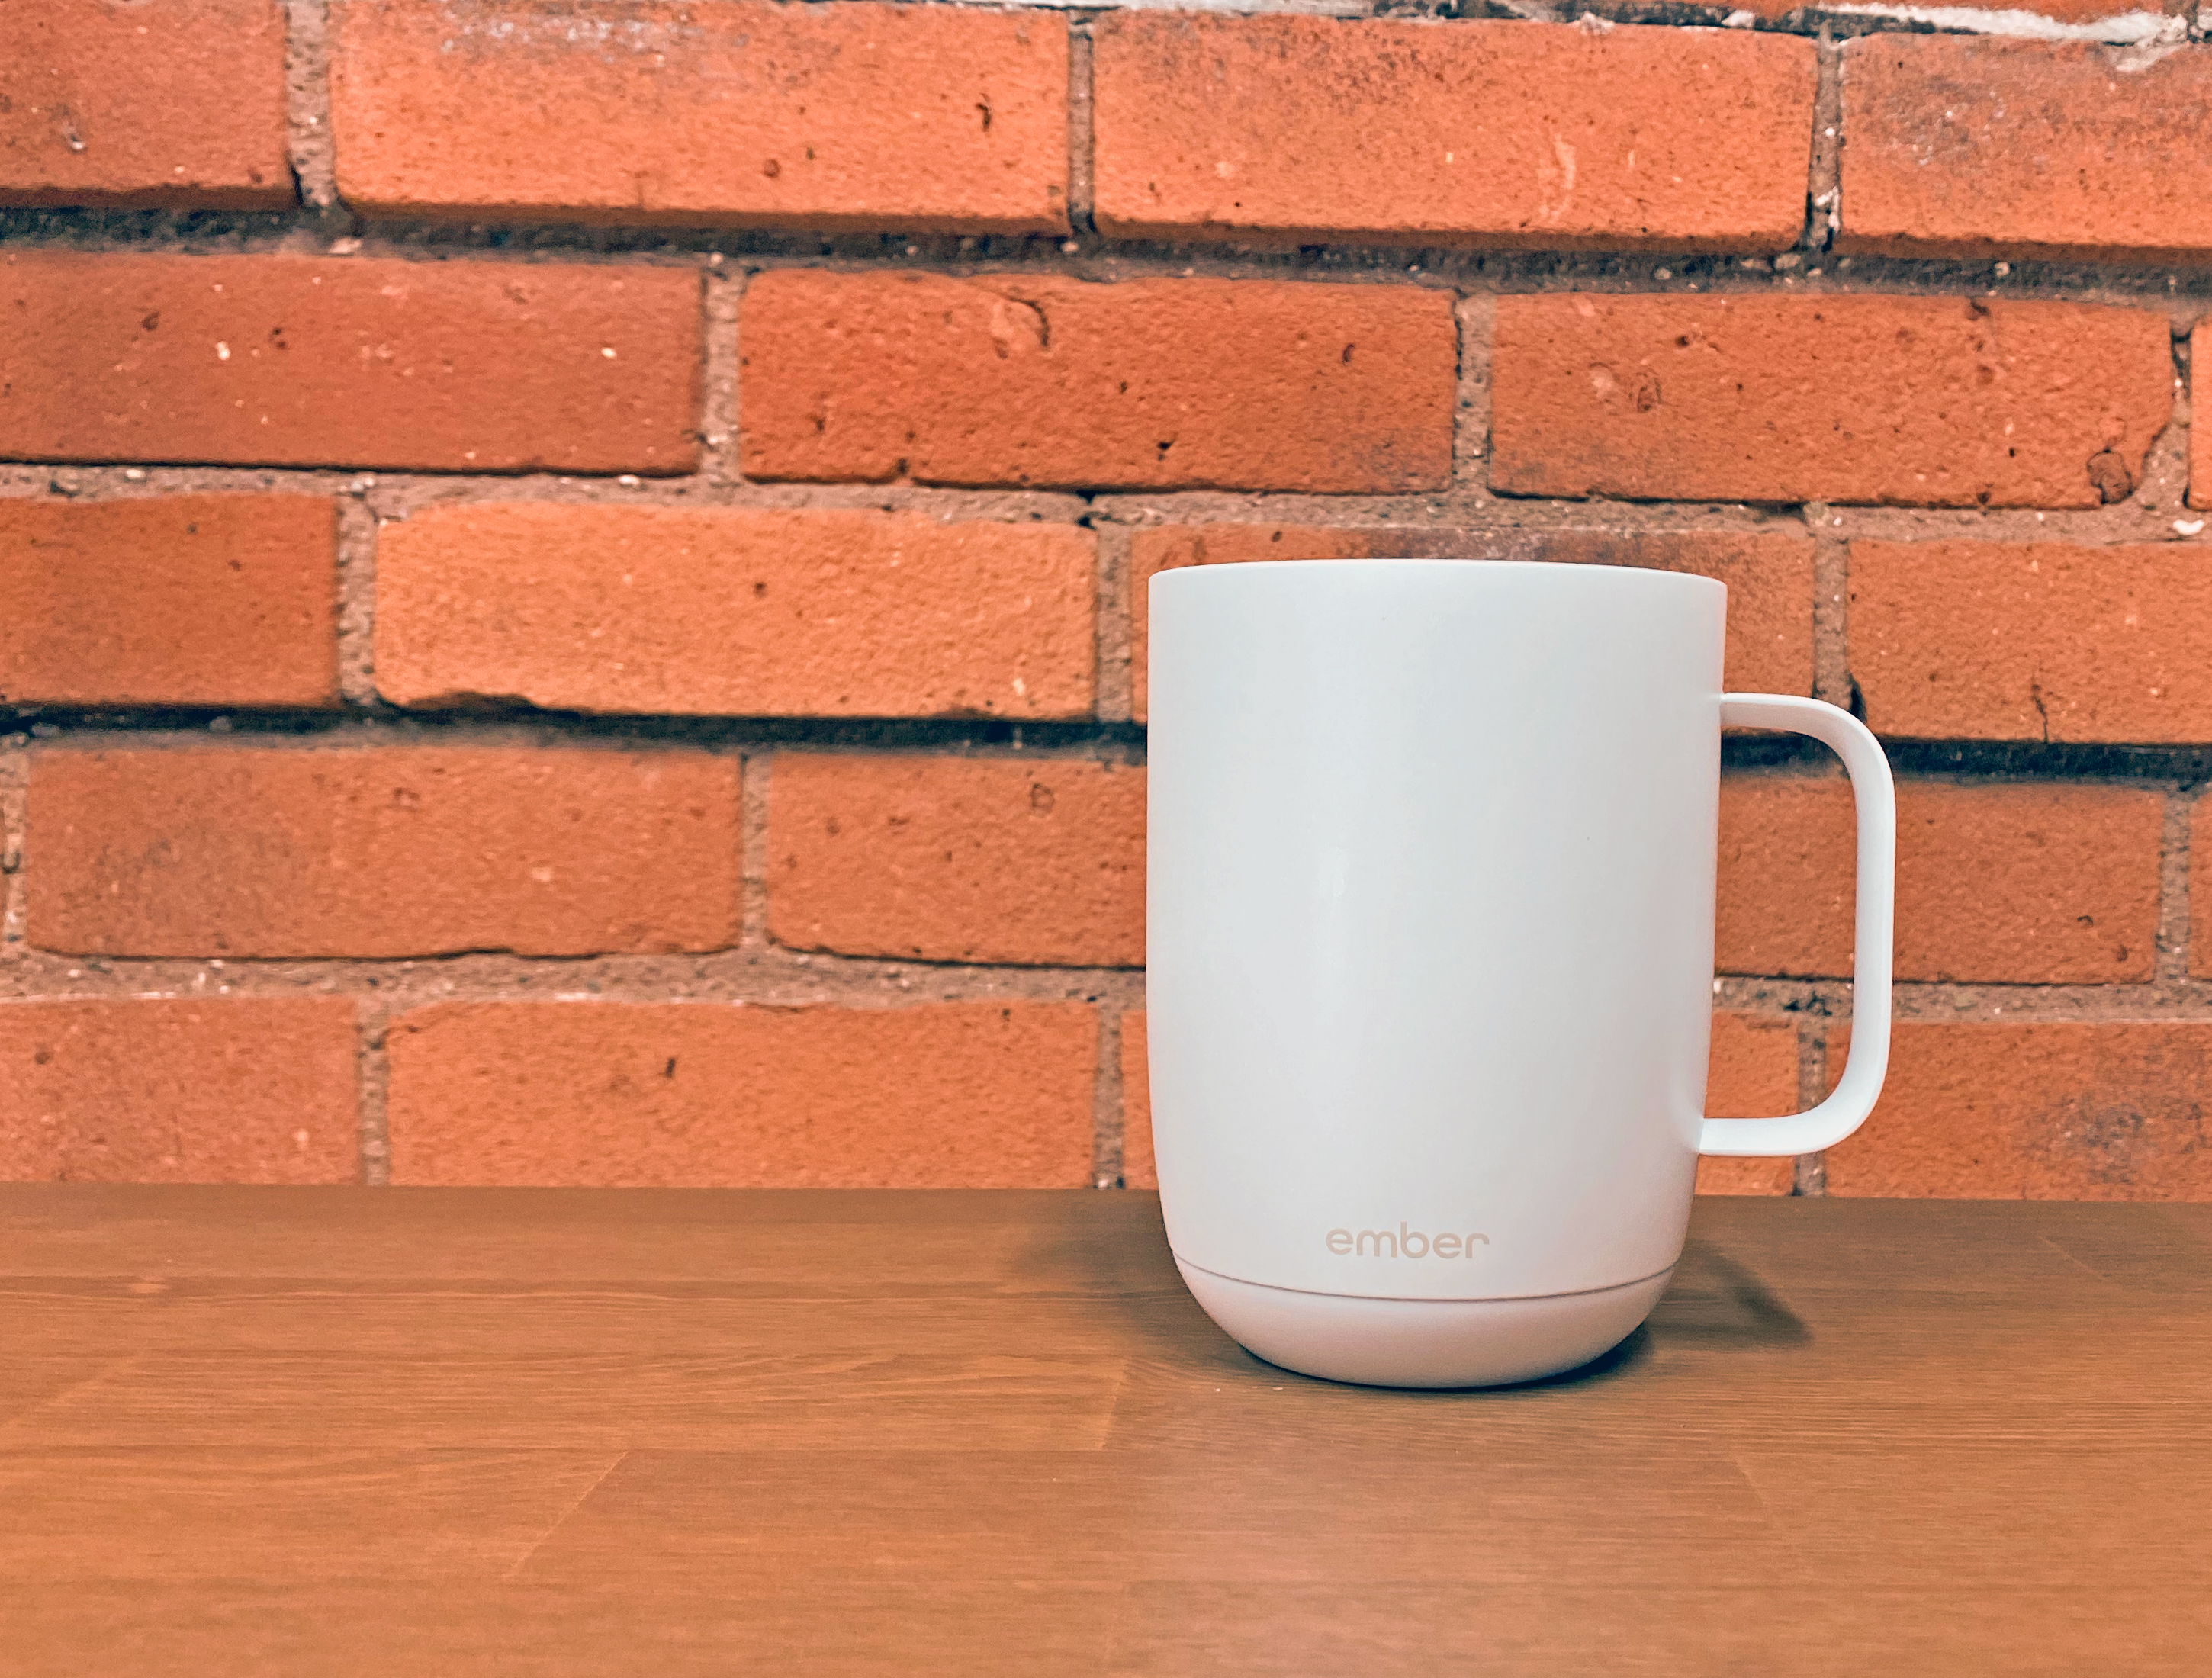 Ember Mug 2 Review: Never Drink Cold Coffee Again